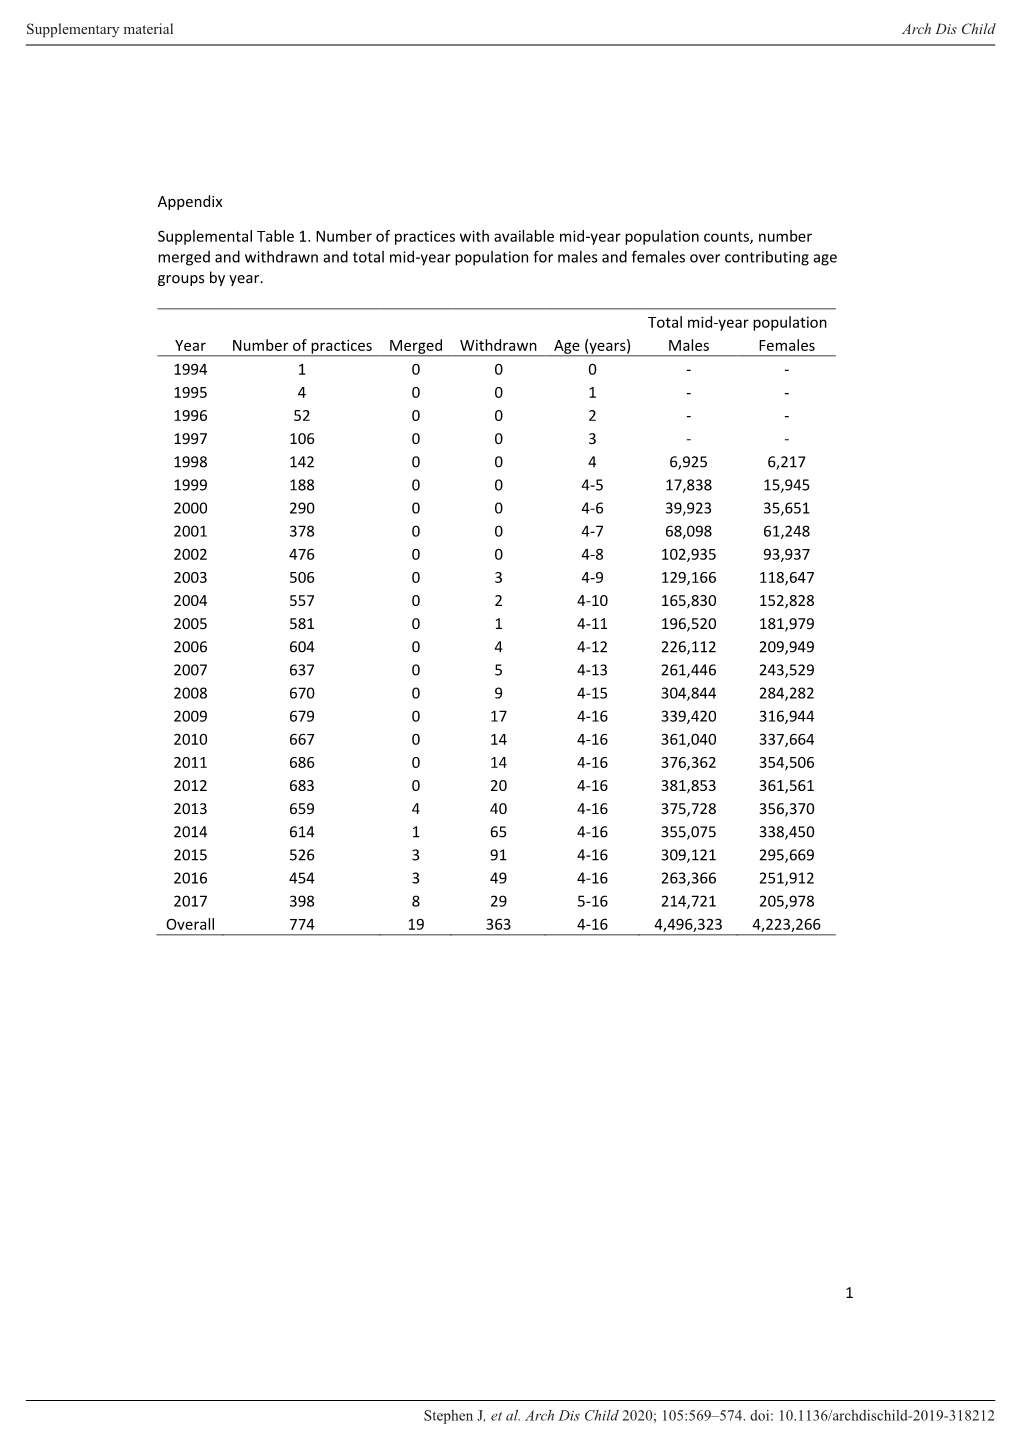 1 Appendix Supplemental Table 1. Number of Practices with Available